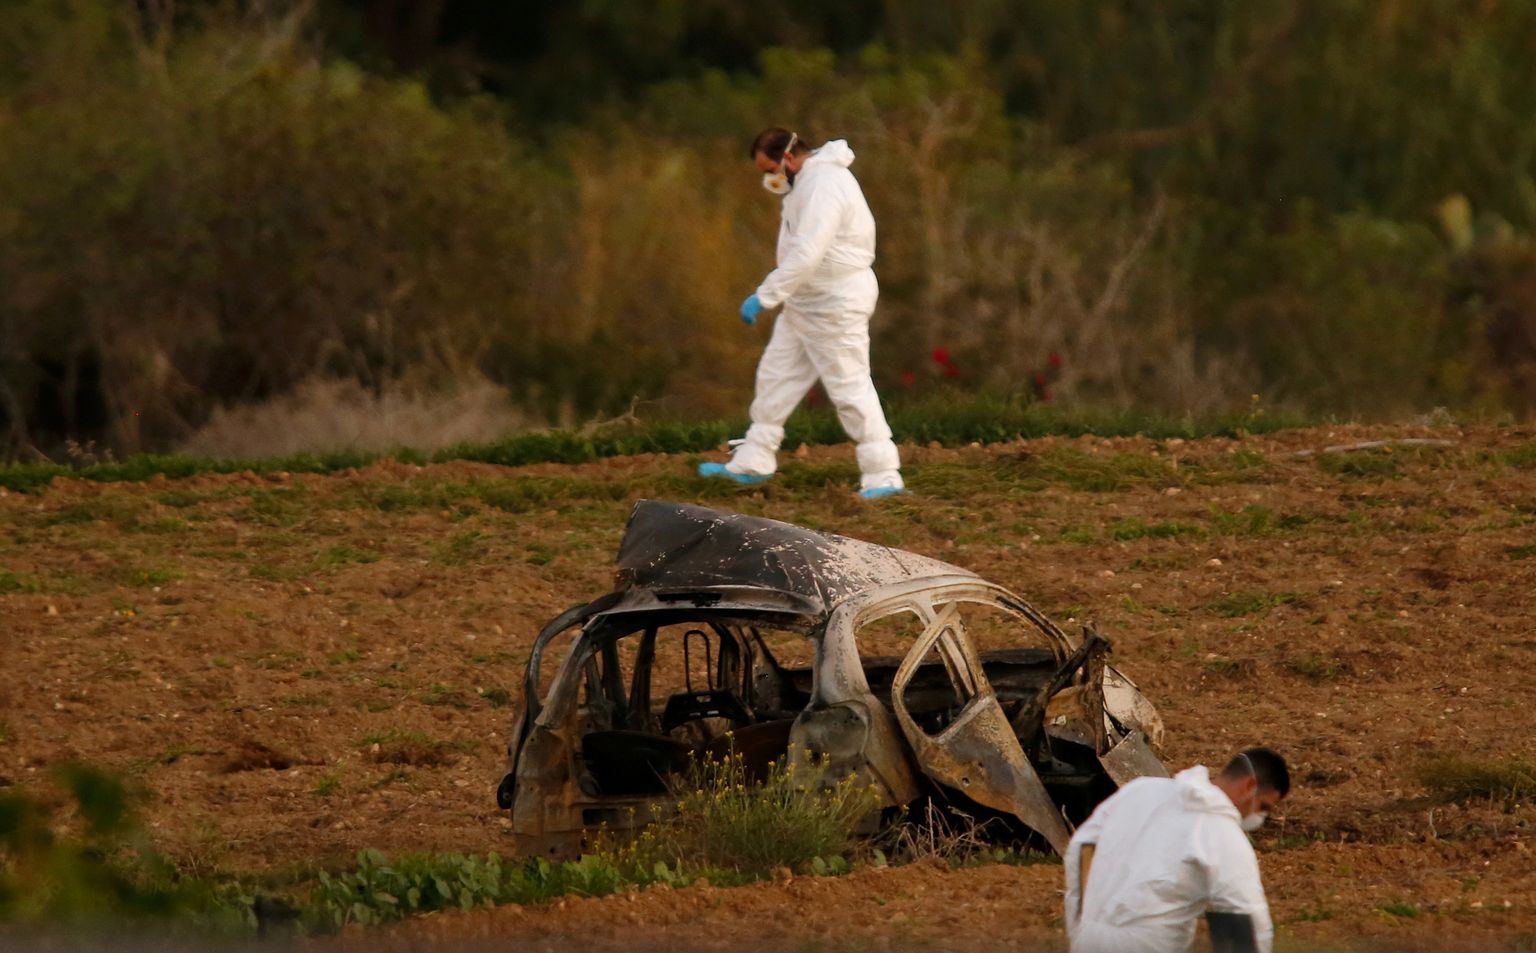 FILE PHOTO: Forensic experts walk in a field after a powerful bomb blew up a car (Foreground) and killed investigative journalist Daphne Caruana Galizia in Bidnija, Malta, October 16, 2017.   To match Special Report MALTA-DAPHNE/CHINA. REUTERS/Darrin Zammit Lupi/File Photo